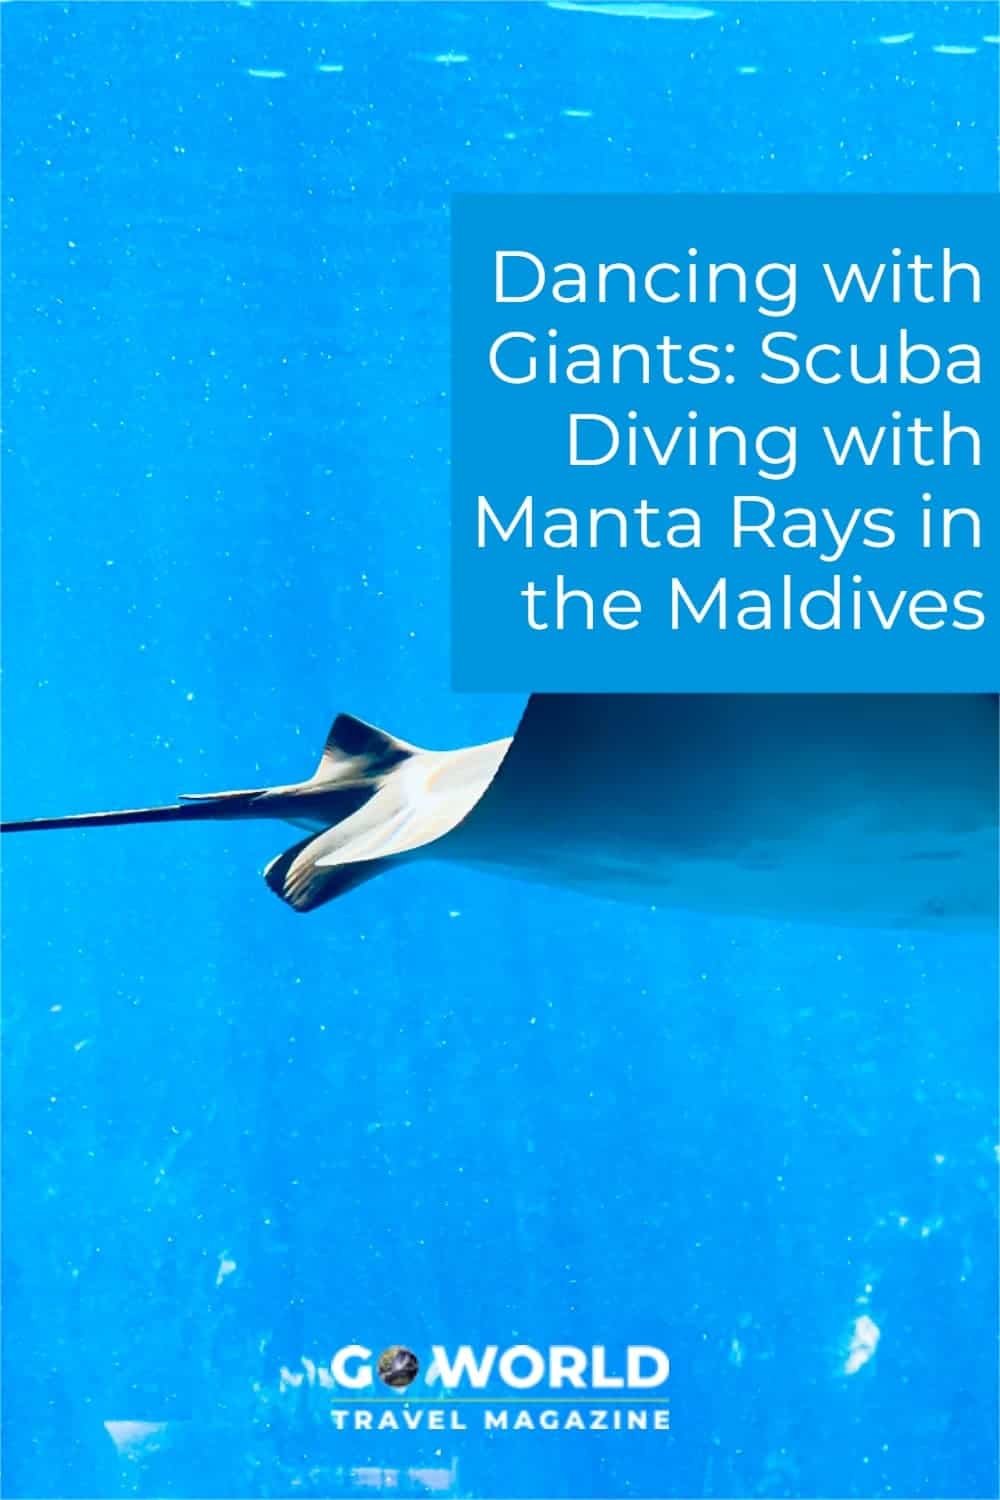 Dancing with Giants: Scuba Diving with Manta Rays in the Maldives